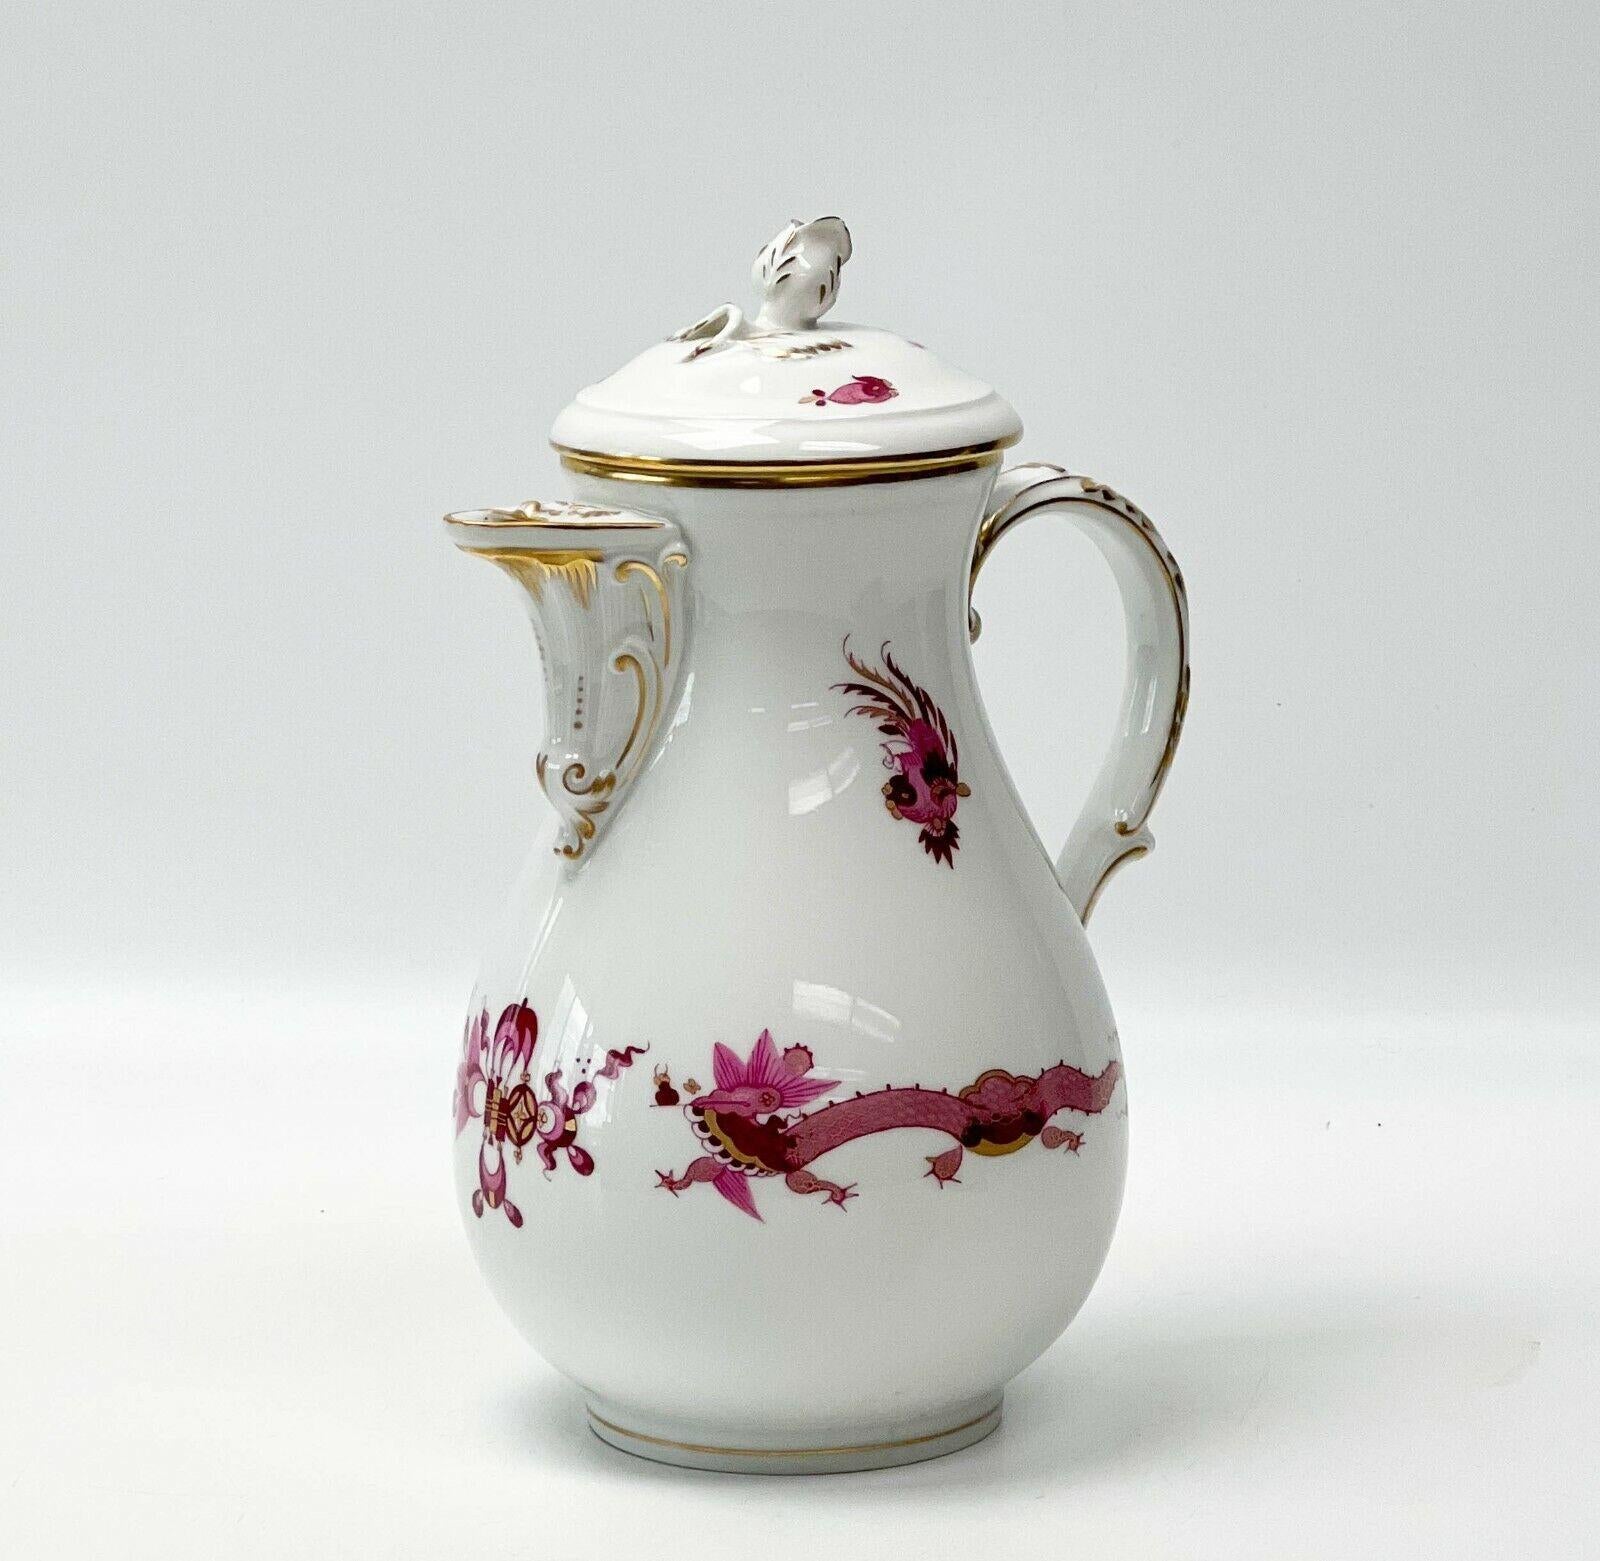 Meissen Germany Kakiemon Dragon Hand Painted Porcelain Coffee or Chocolate Pot. A white ground with hand painted Kakiemon style pink bodies of dragons to either side, florals and ribbons. Gilt accents, gilt to the handle, spout, and rim. A rose